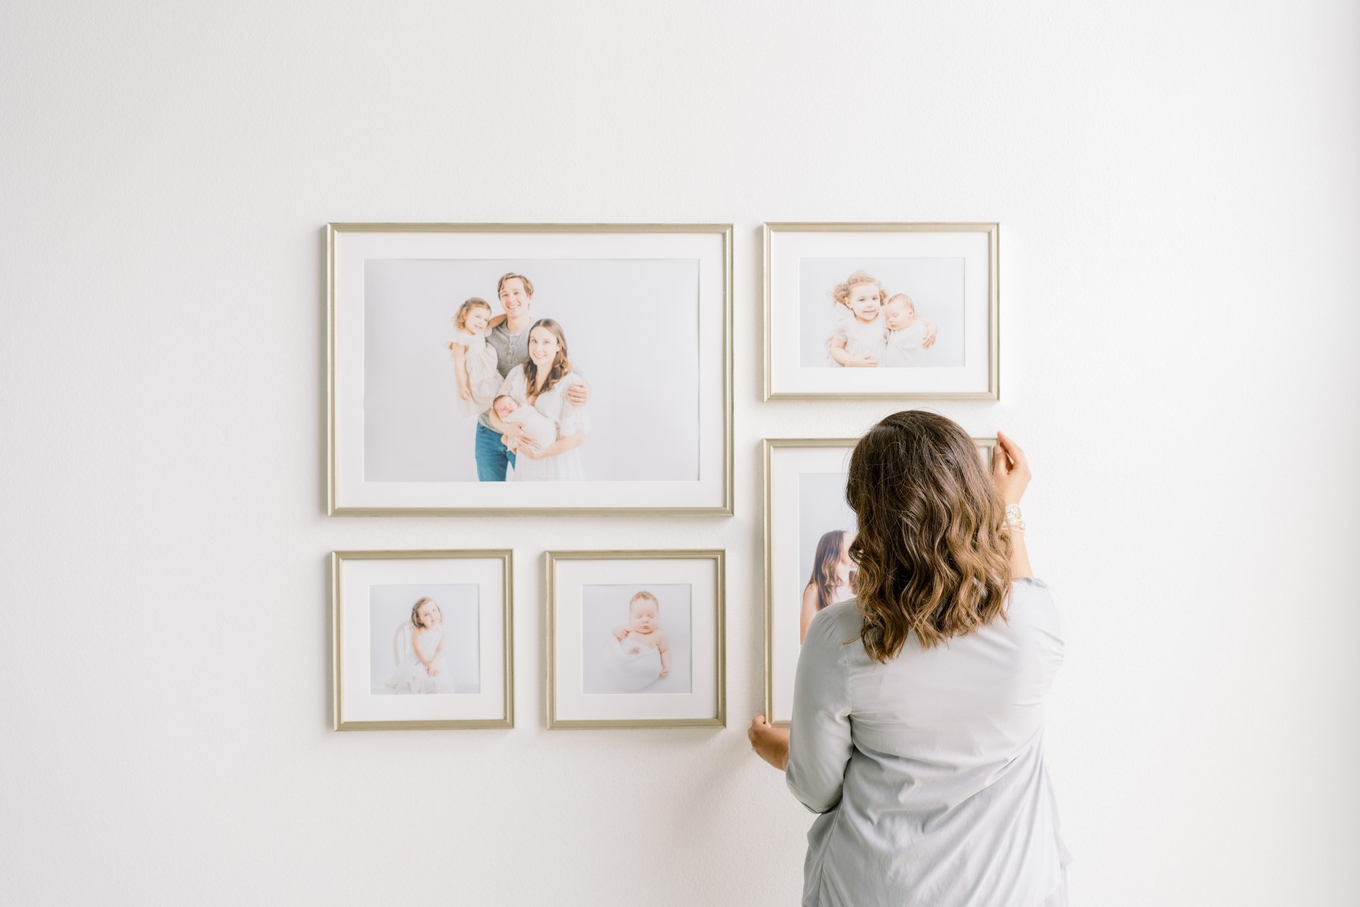 Custom-designed gallery wall with newborn and maternity images by Austin baby photographer, Sana Ahmed Photography.